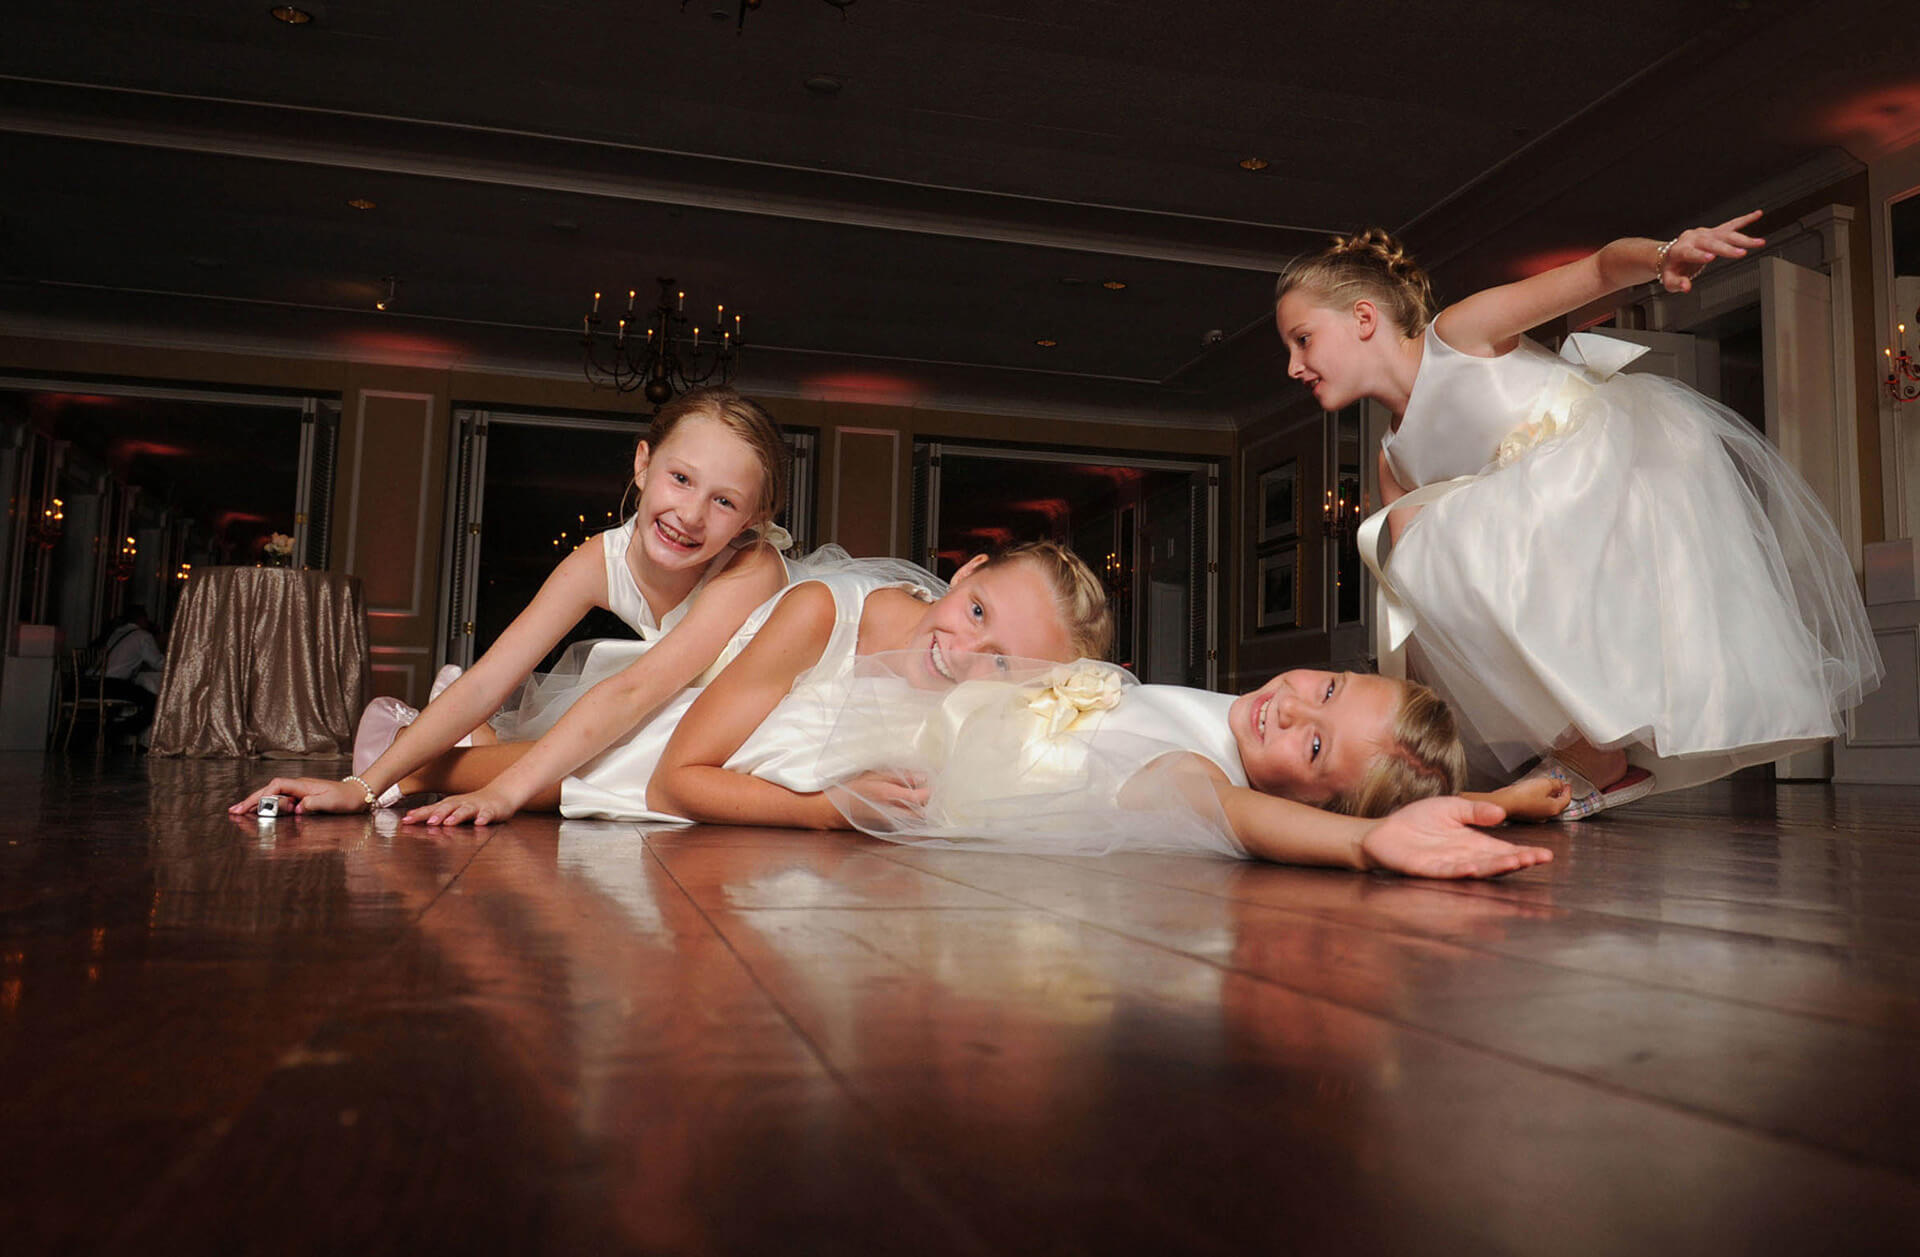 The flower girls have a spontaneous pile on in the middle of the dance floor at the Oakland Hills Country Club in Birmingham, Michigan wedding reception in this fun candid moment captured by one of the most affordable Michigan wedding photographers in Metro Detroit, Michigan.